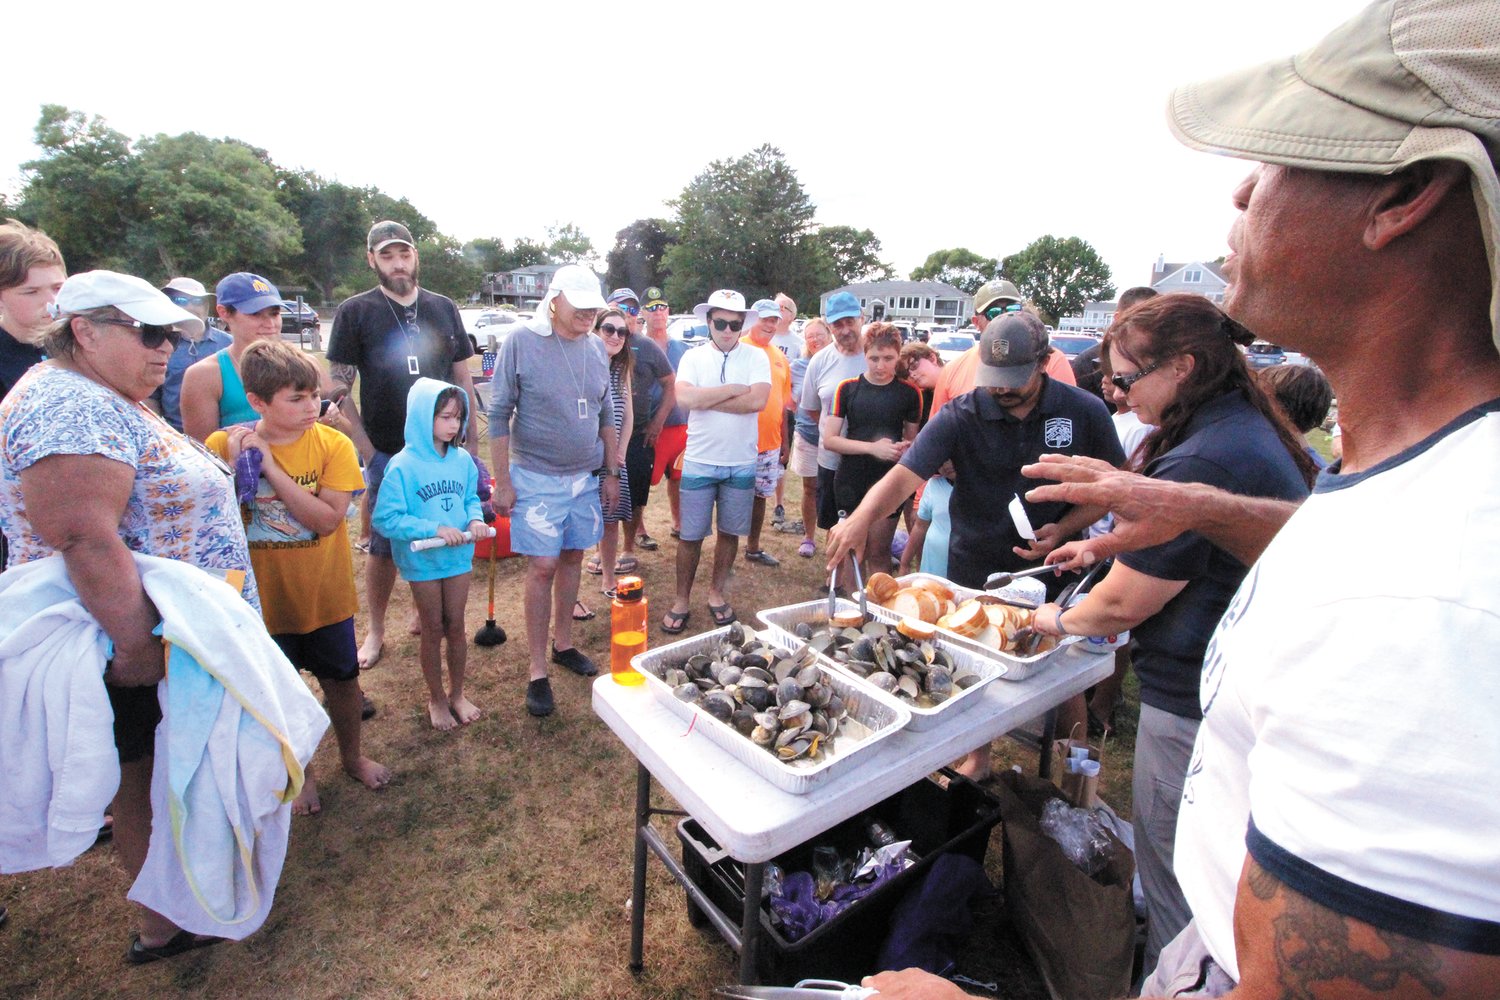 A TASTE OF THEIR FINDS: Before being served bowls of quahogs steamed in their own broth, Jody King gave the more than 50 participating in the free program co-sponsored by DEM and the Vet Center his father’s recipe. 